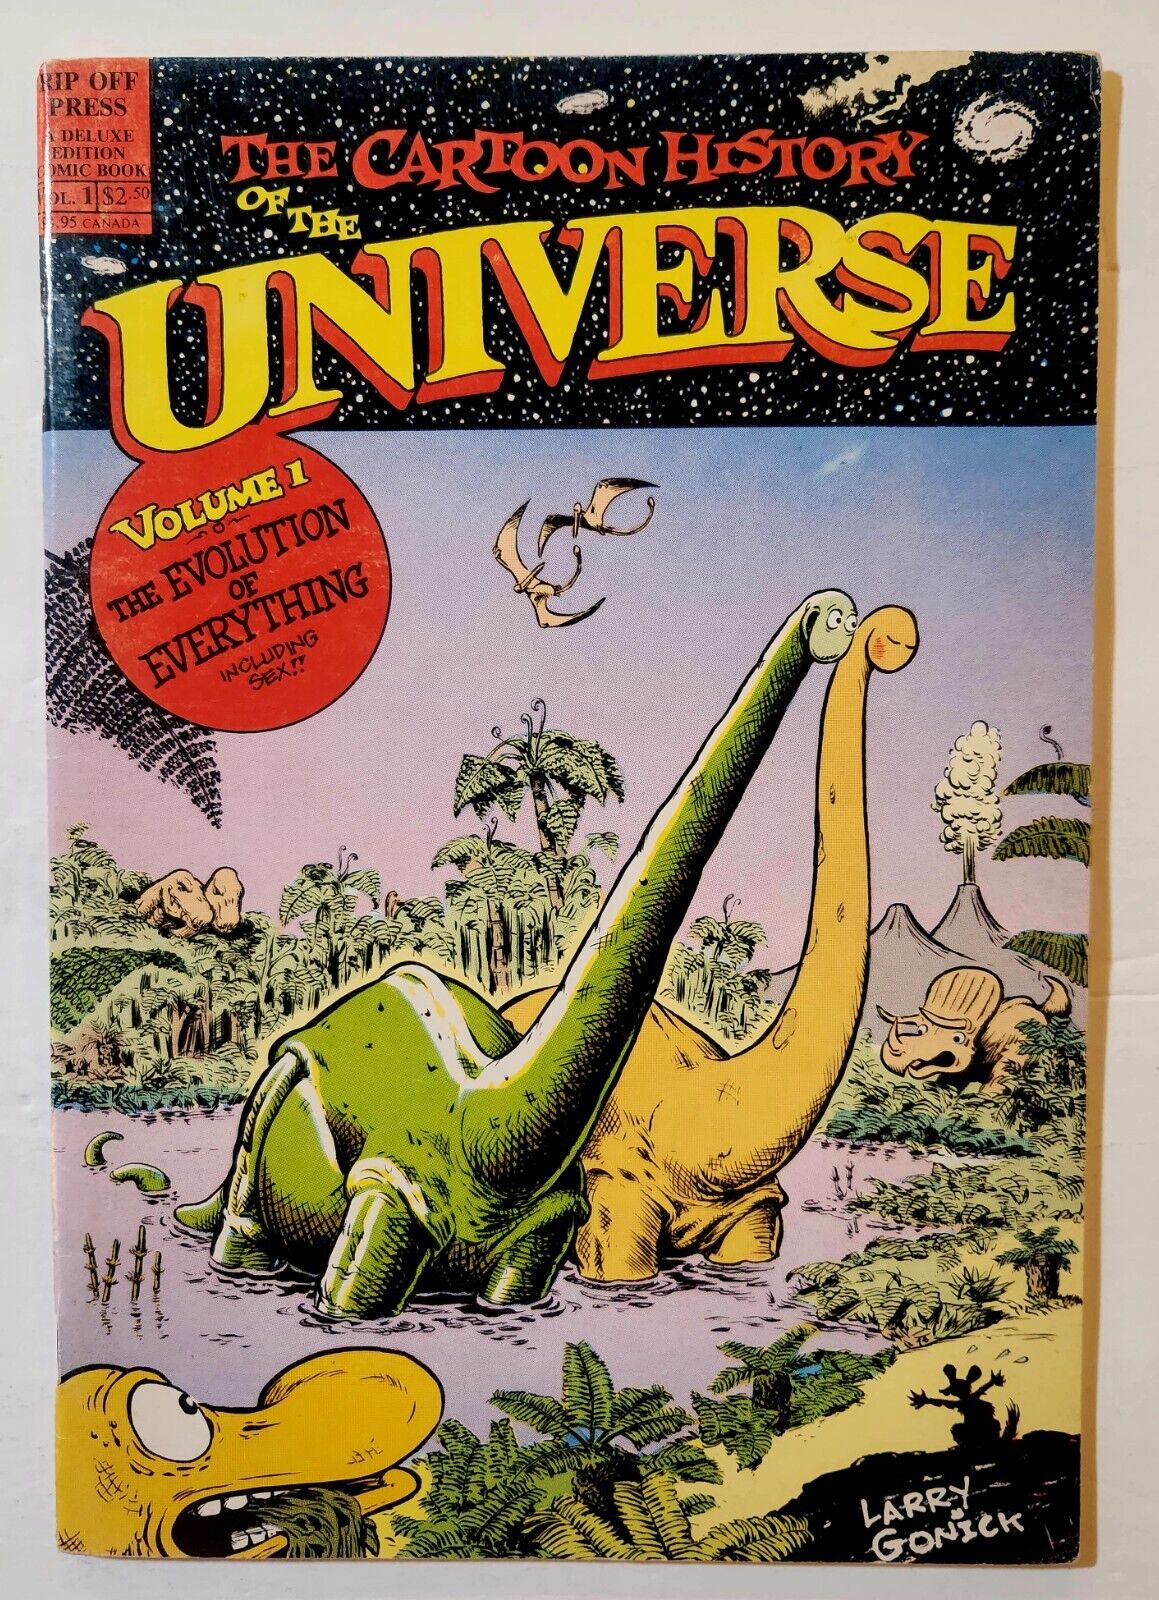 THE CARTOON HISTORY OF THE UNIVERSE #1 RIP OFF PRESS 1987 1st Print VF/NM